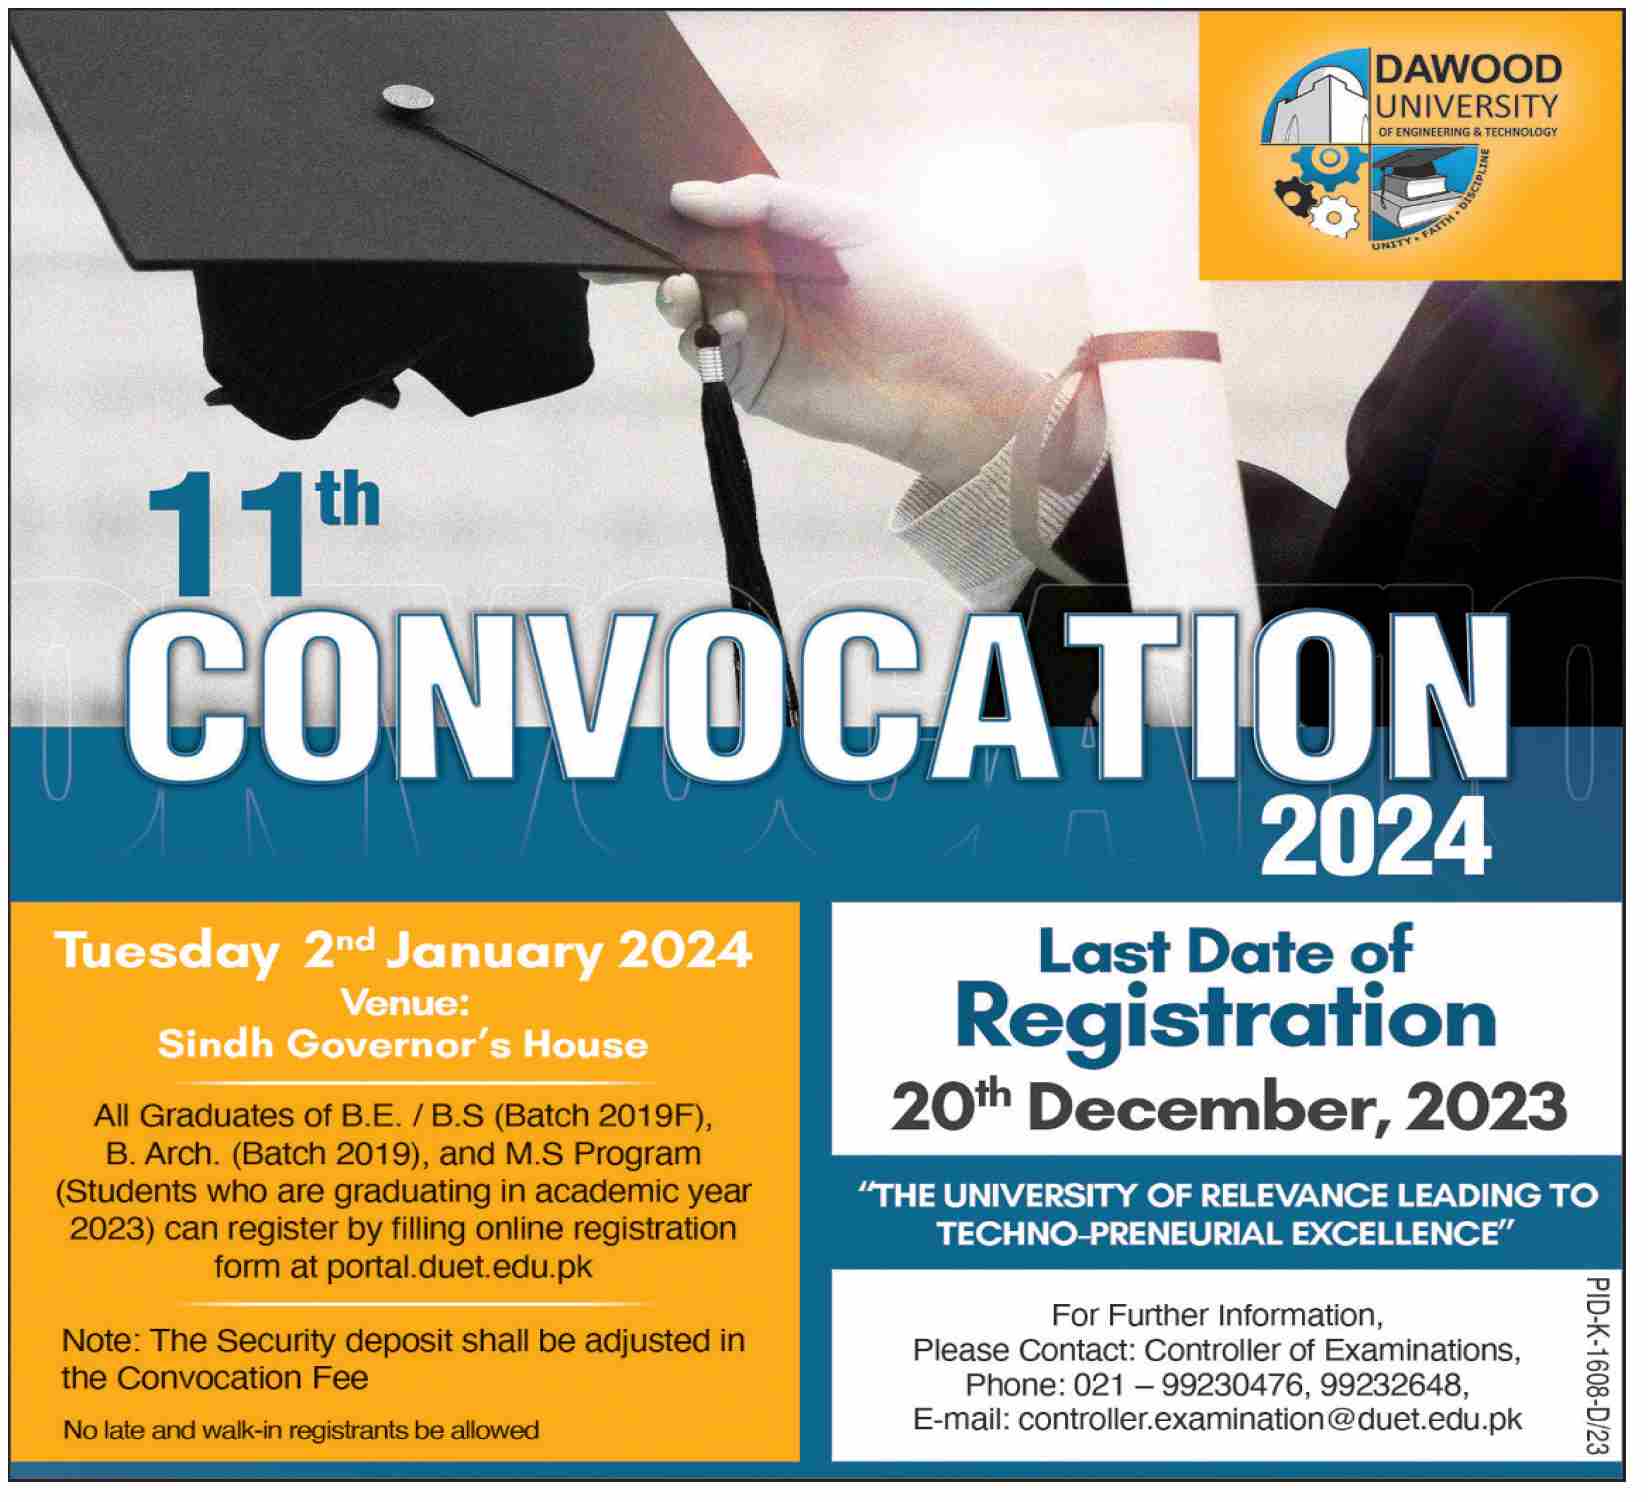 Dawood University of Engineering & Technology 11th Convocation 2024